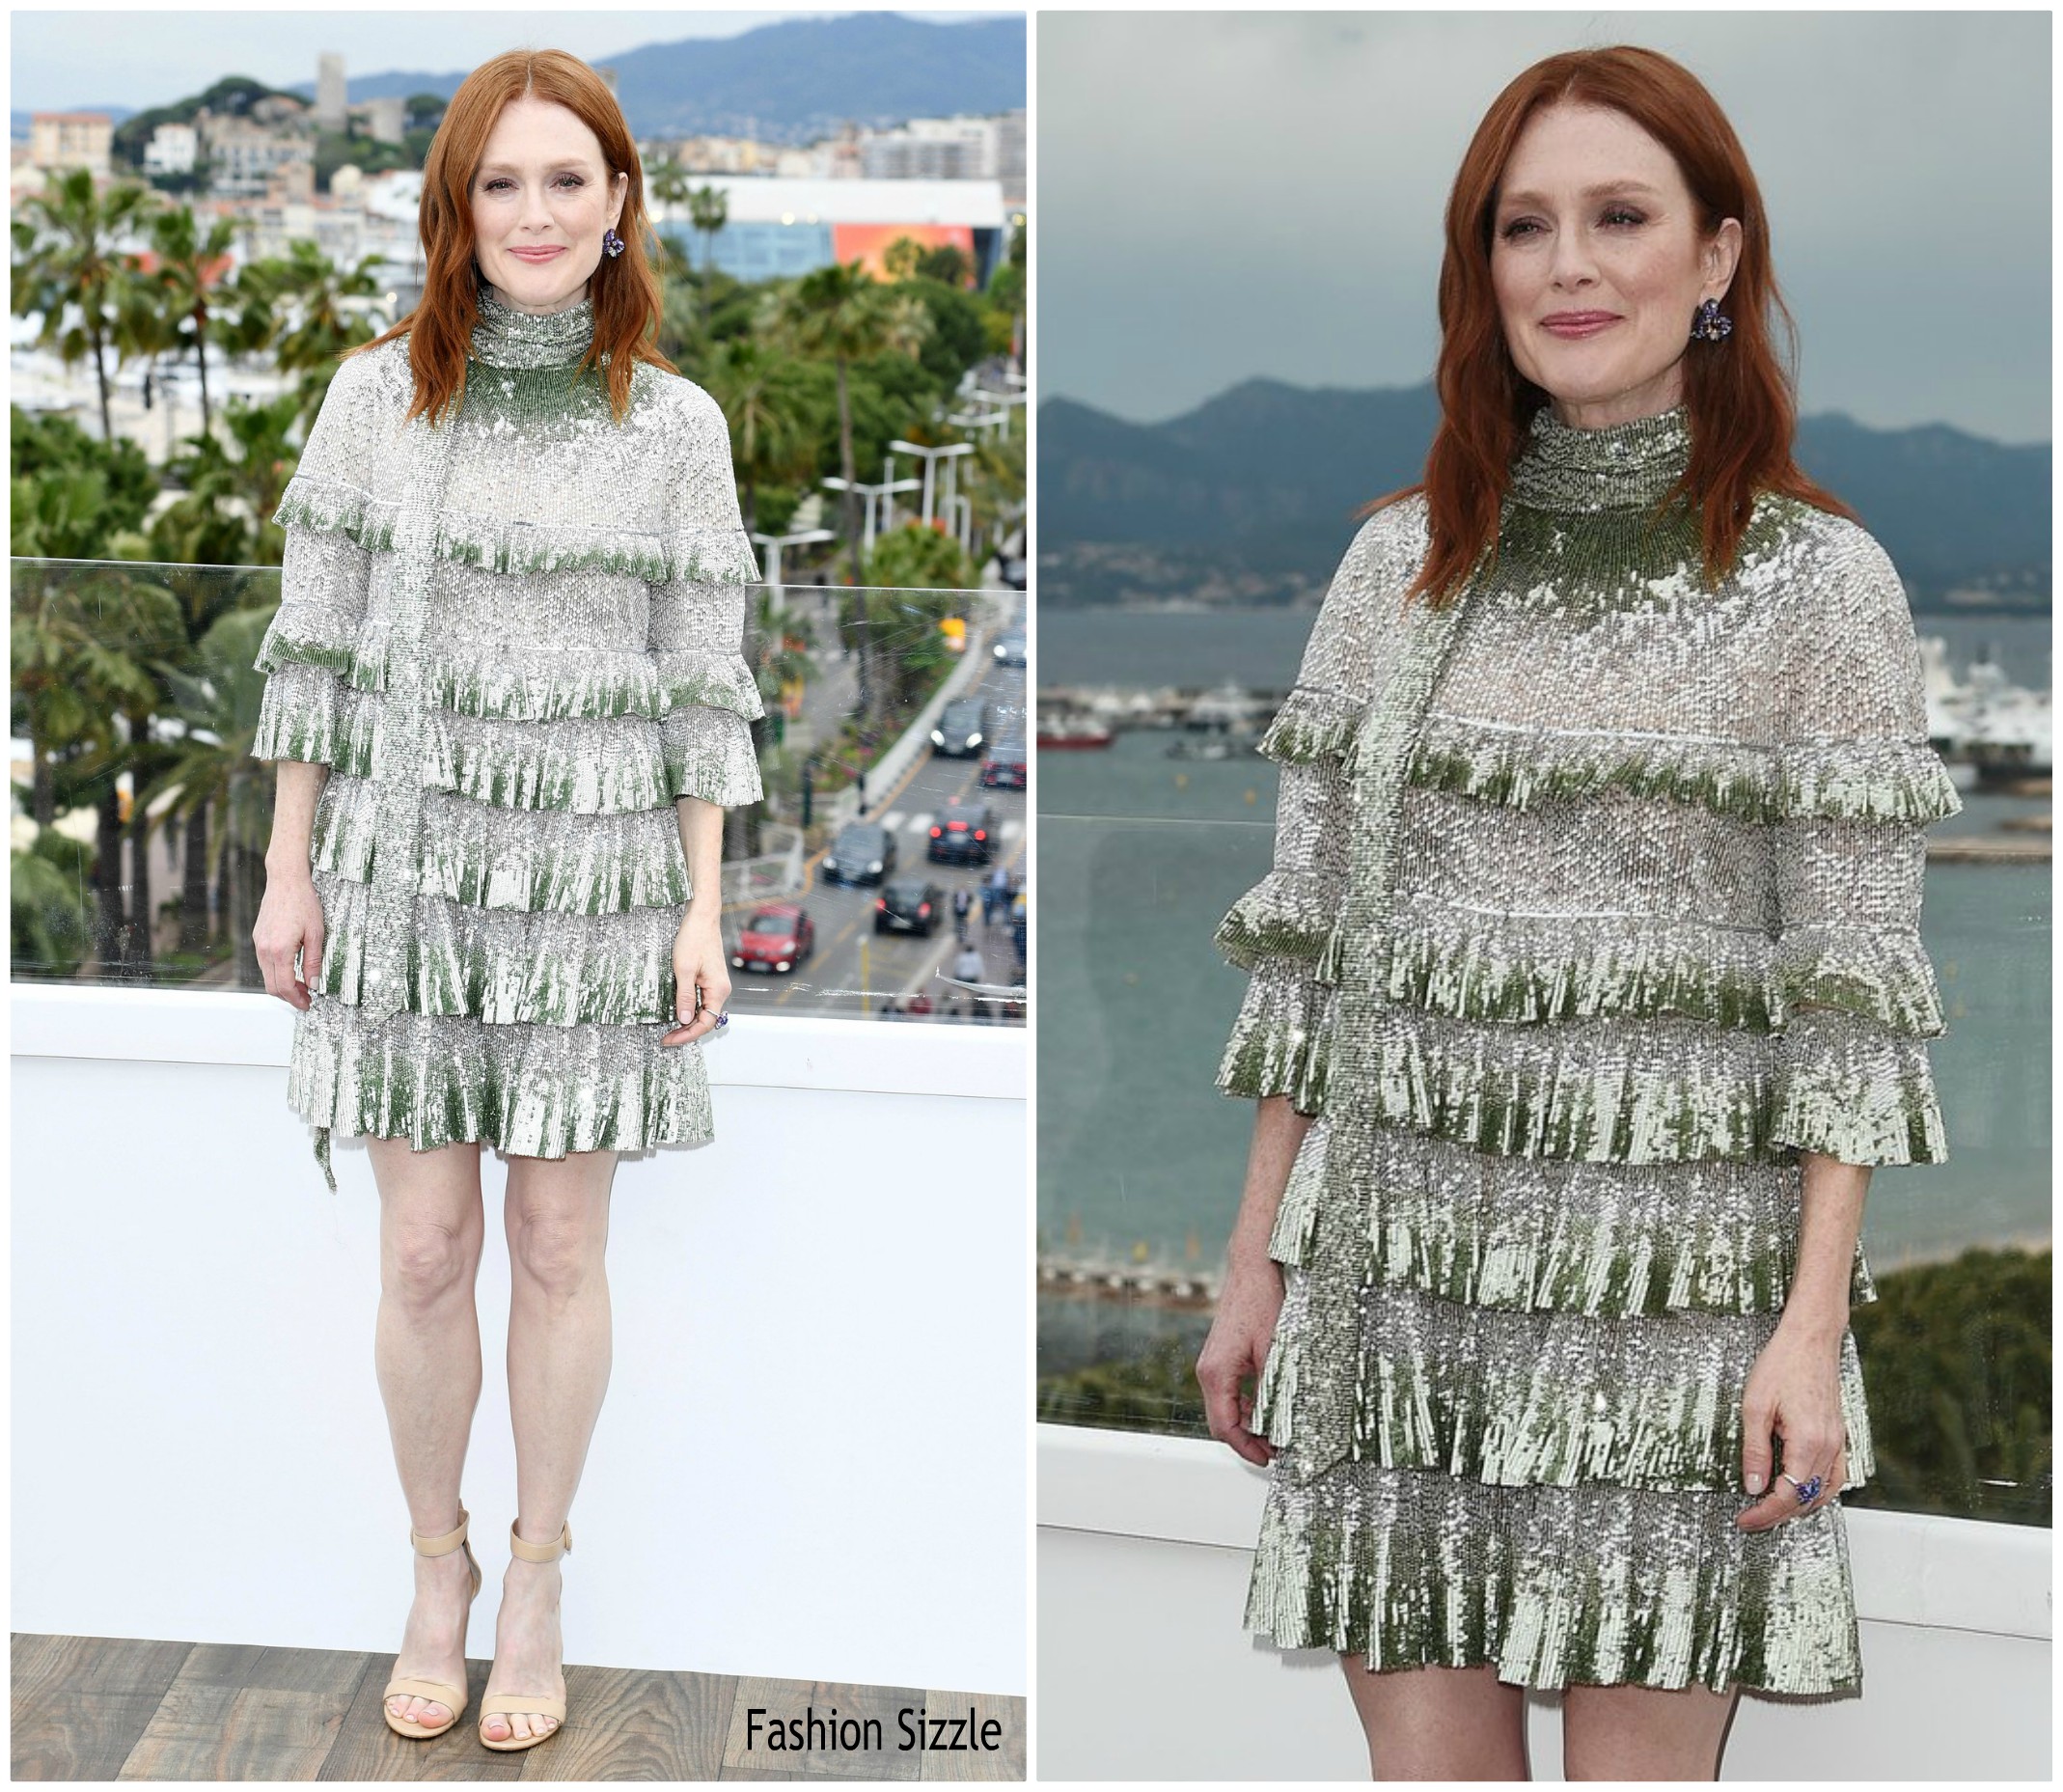 julianne-moore-in-vallentino-staggering-girl-cannes-film-festival-photocall